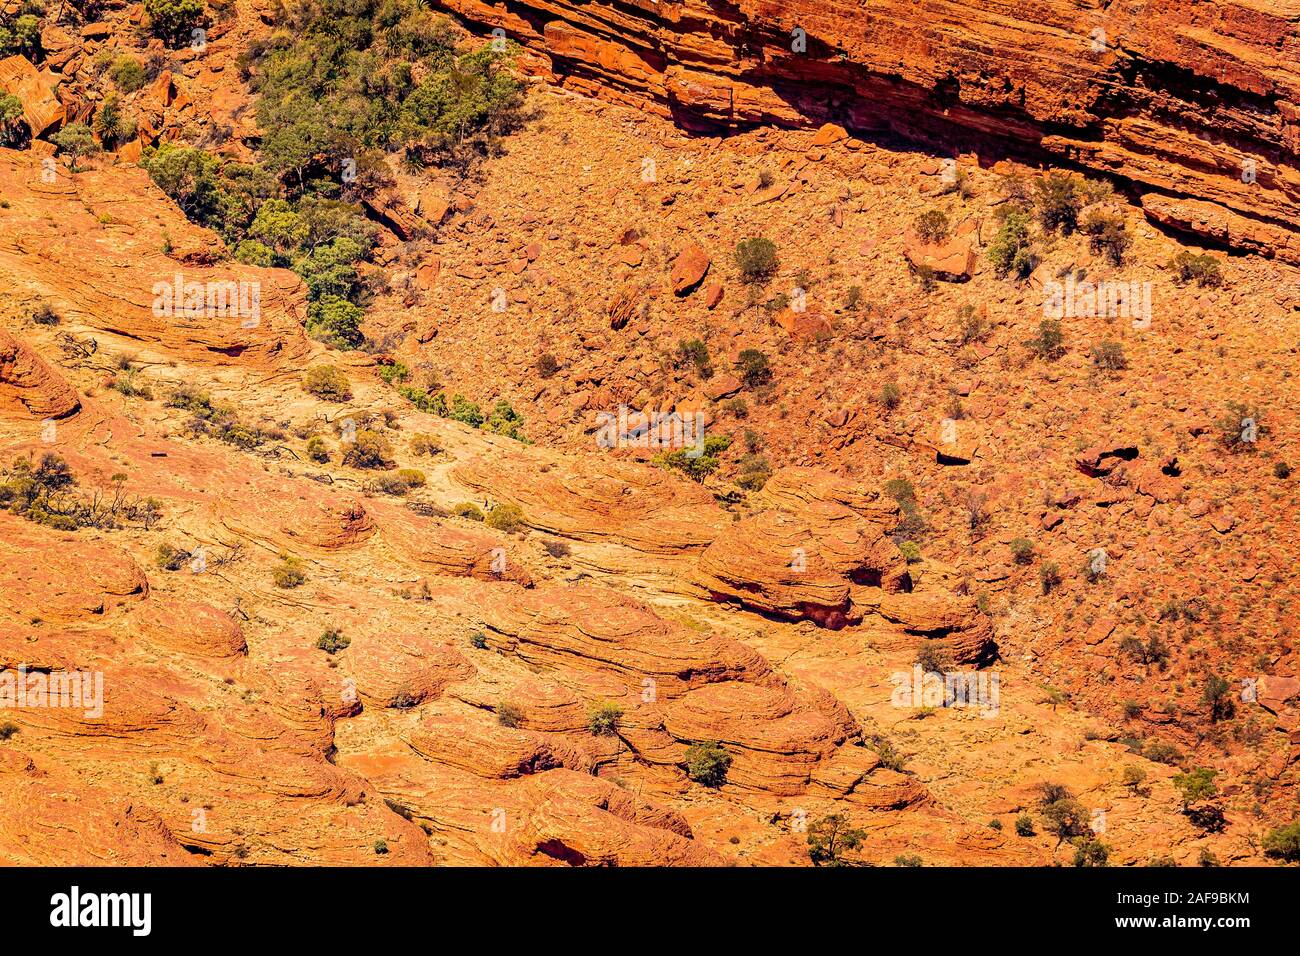 Aerial view of Kings Canyon and the surrounding George Gill Ranges in the remote Northern Territory within central Australia. Stock Photo